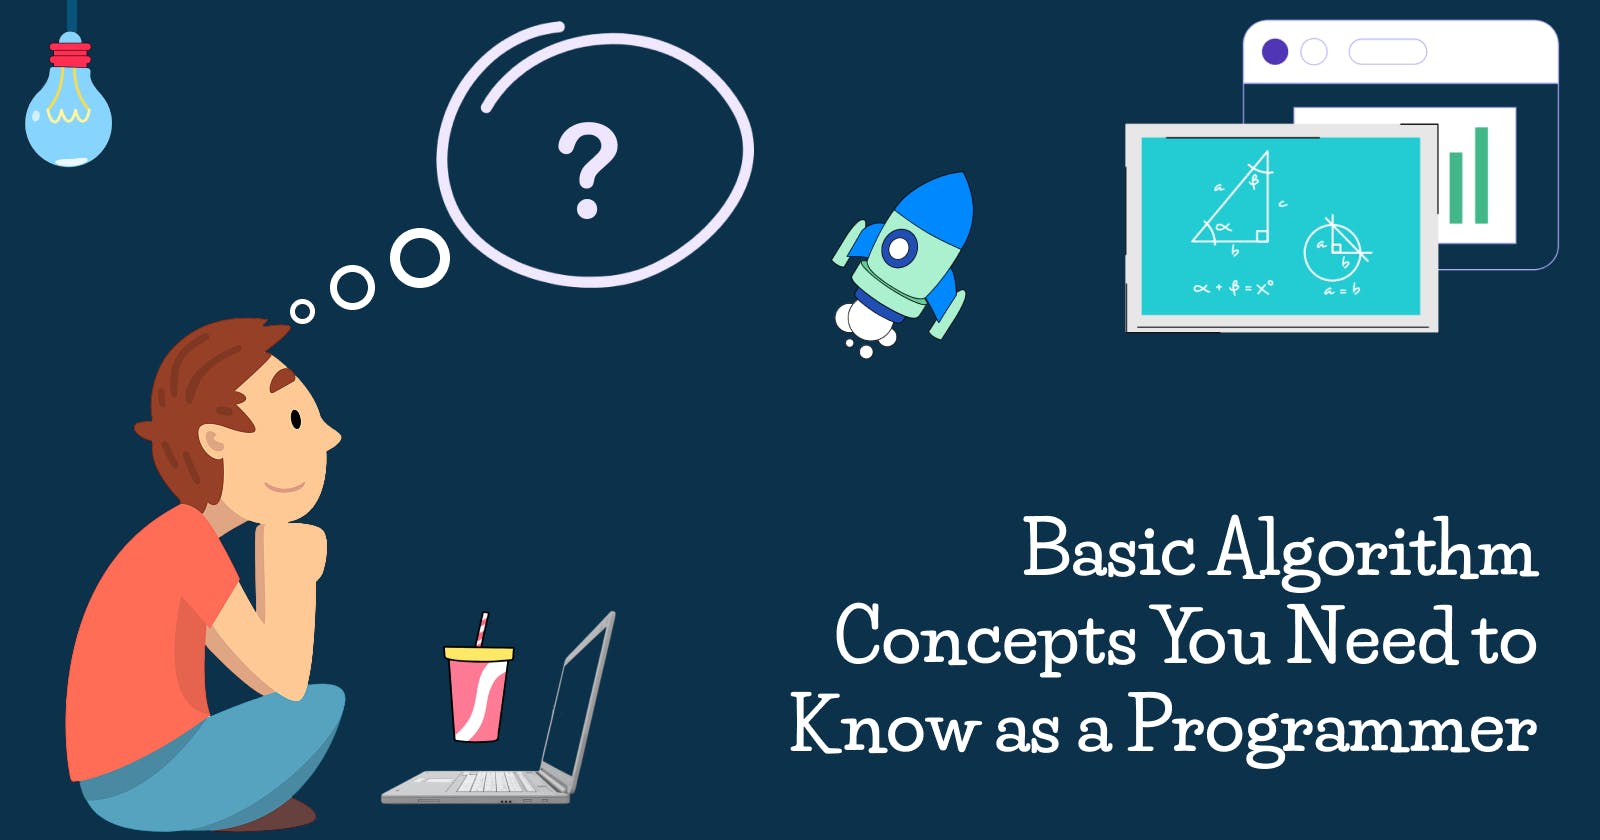 Basic Algorithm Concepts You Need to Know as a Programmer